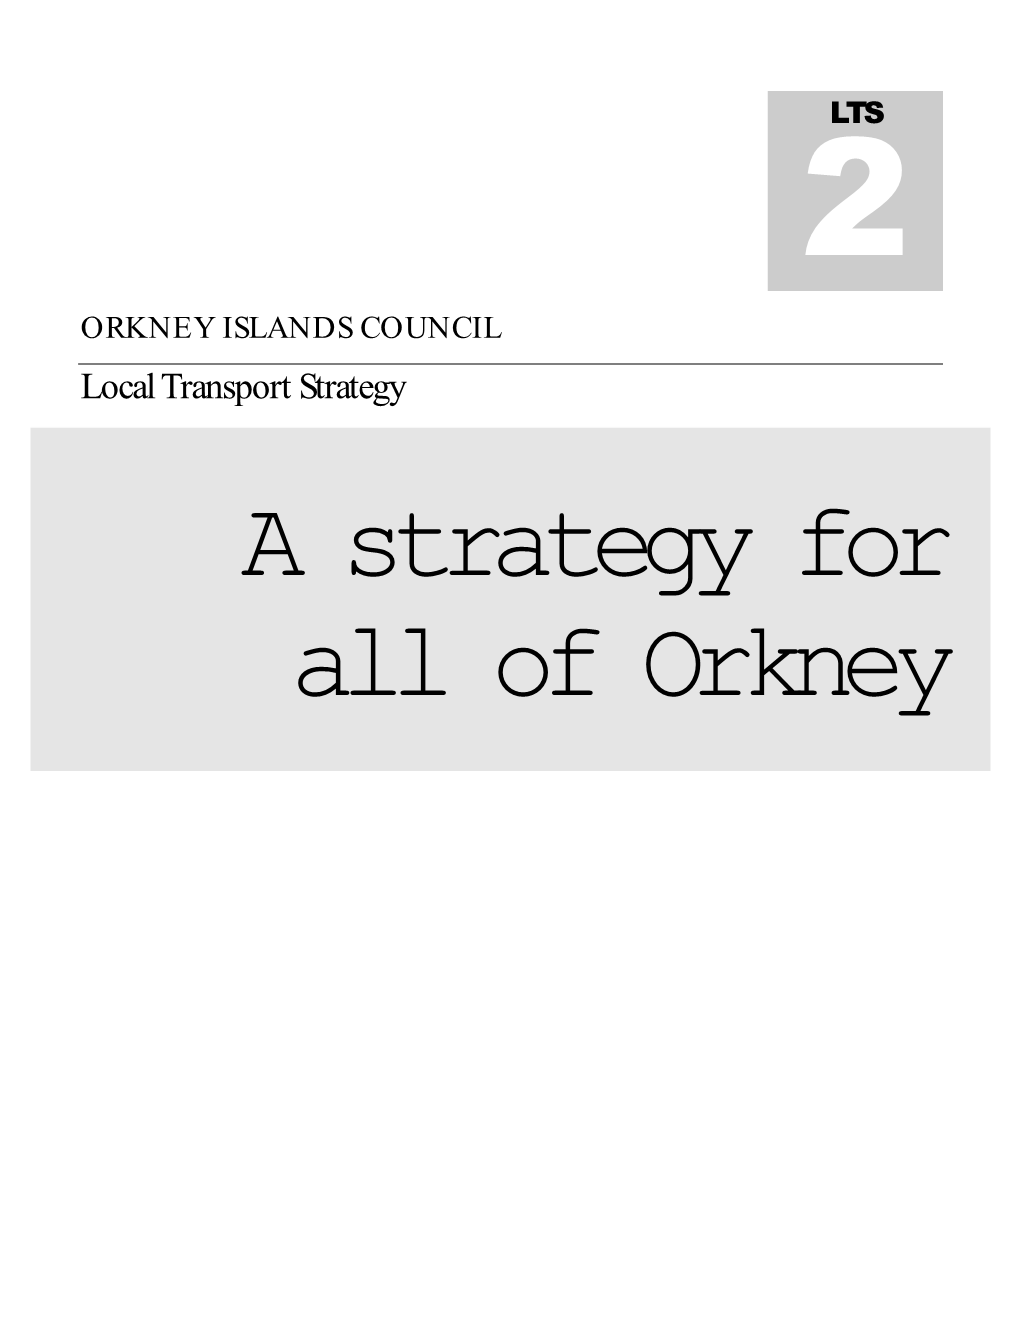 ORKNEY ISLANDS COUNCIL Local Transport Strategy a Strategy for All of Orkney ORKNEY ISLANDS COUNCIL Local Transport Strategy